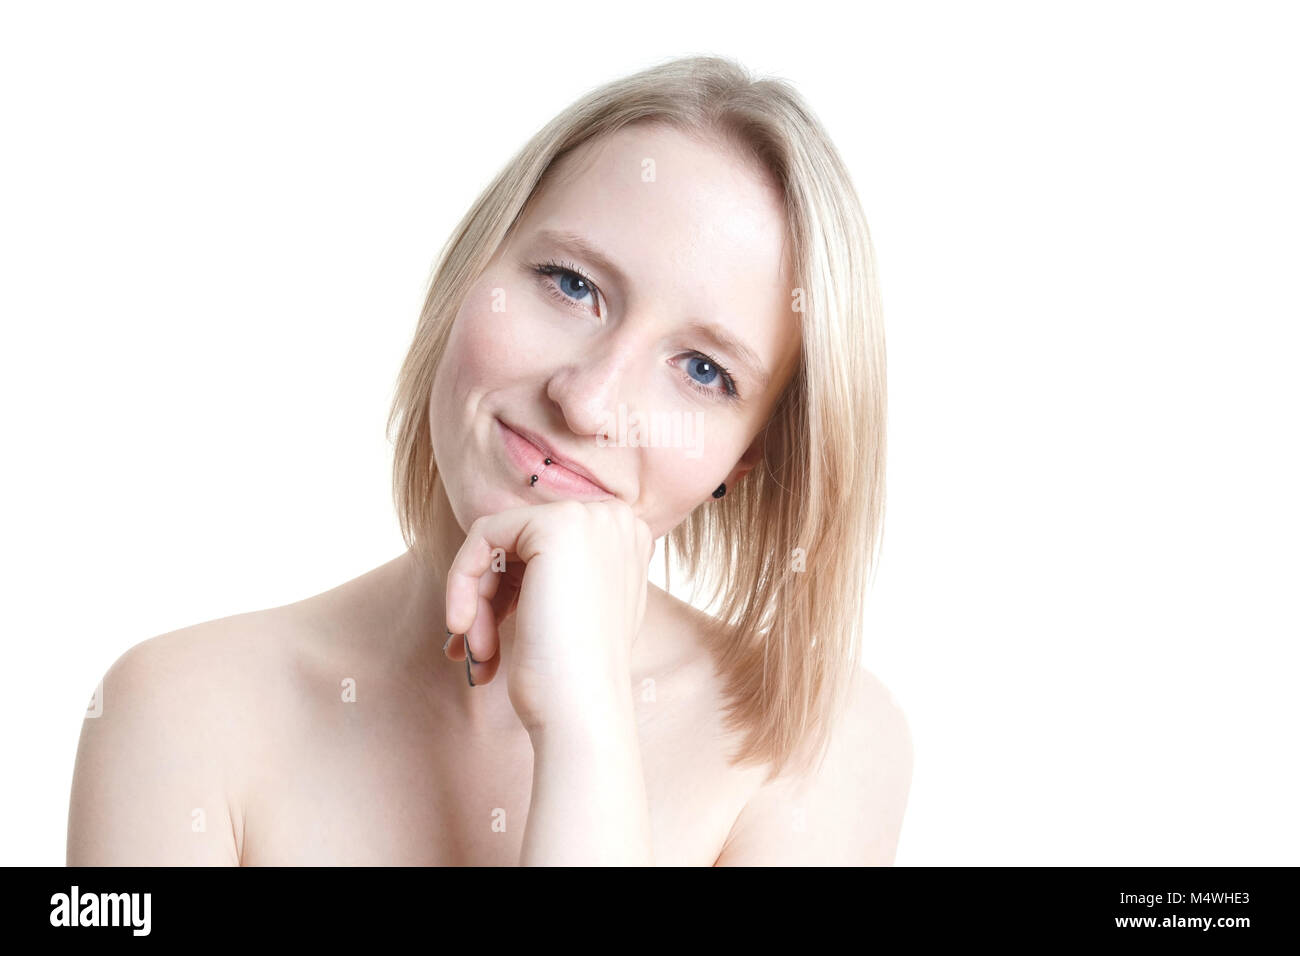 blue-eyed blonde young woman Stock Photo